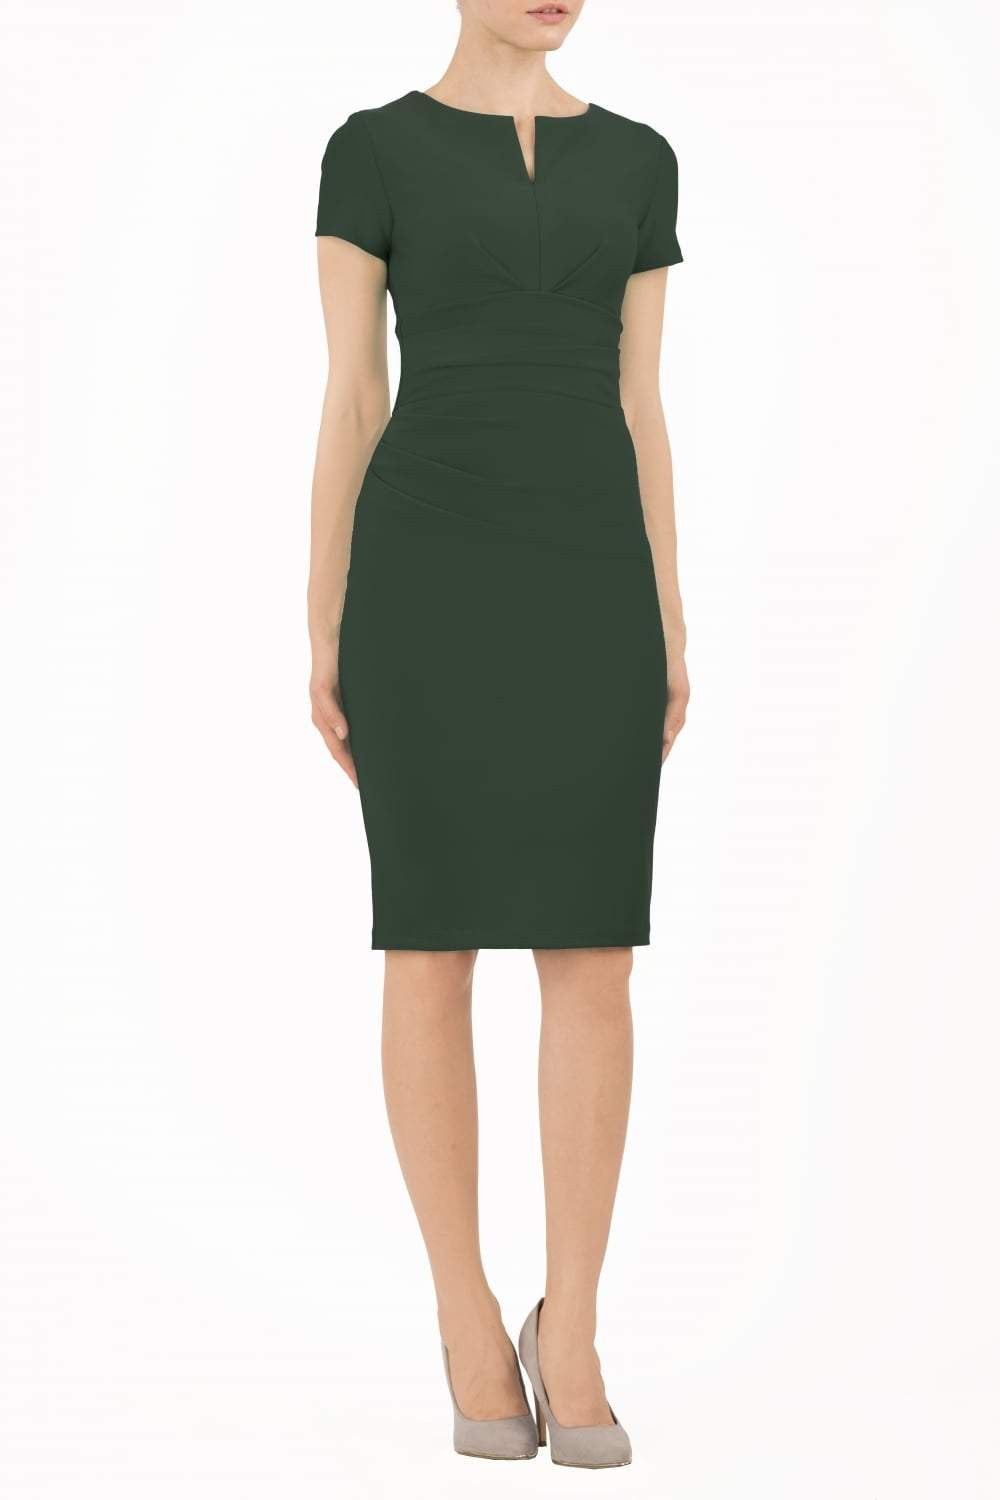 Model wearing Diva Catwalk Donna Short Sleeve Pencil Dress with a wide band and pleating across the tummy area in Forest Green  front